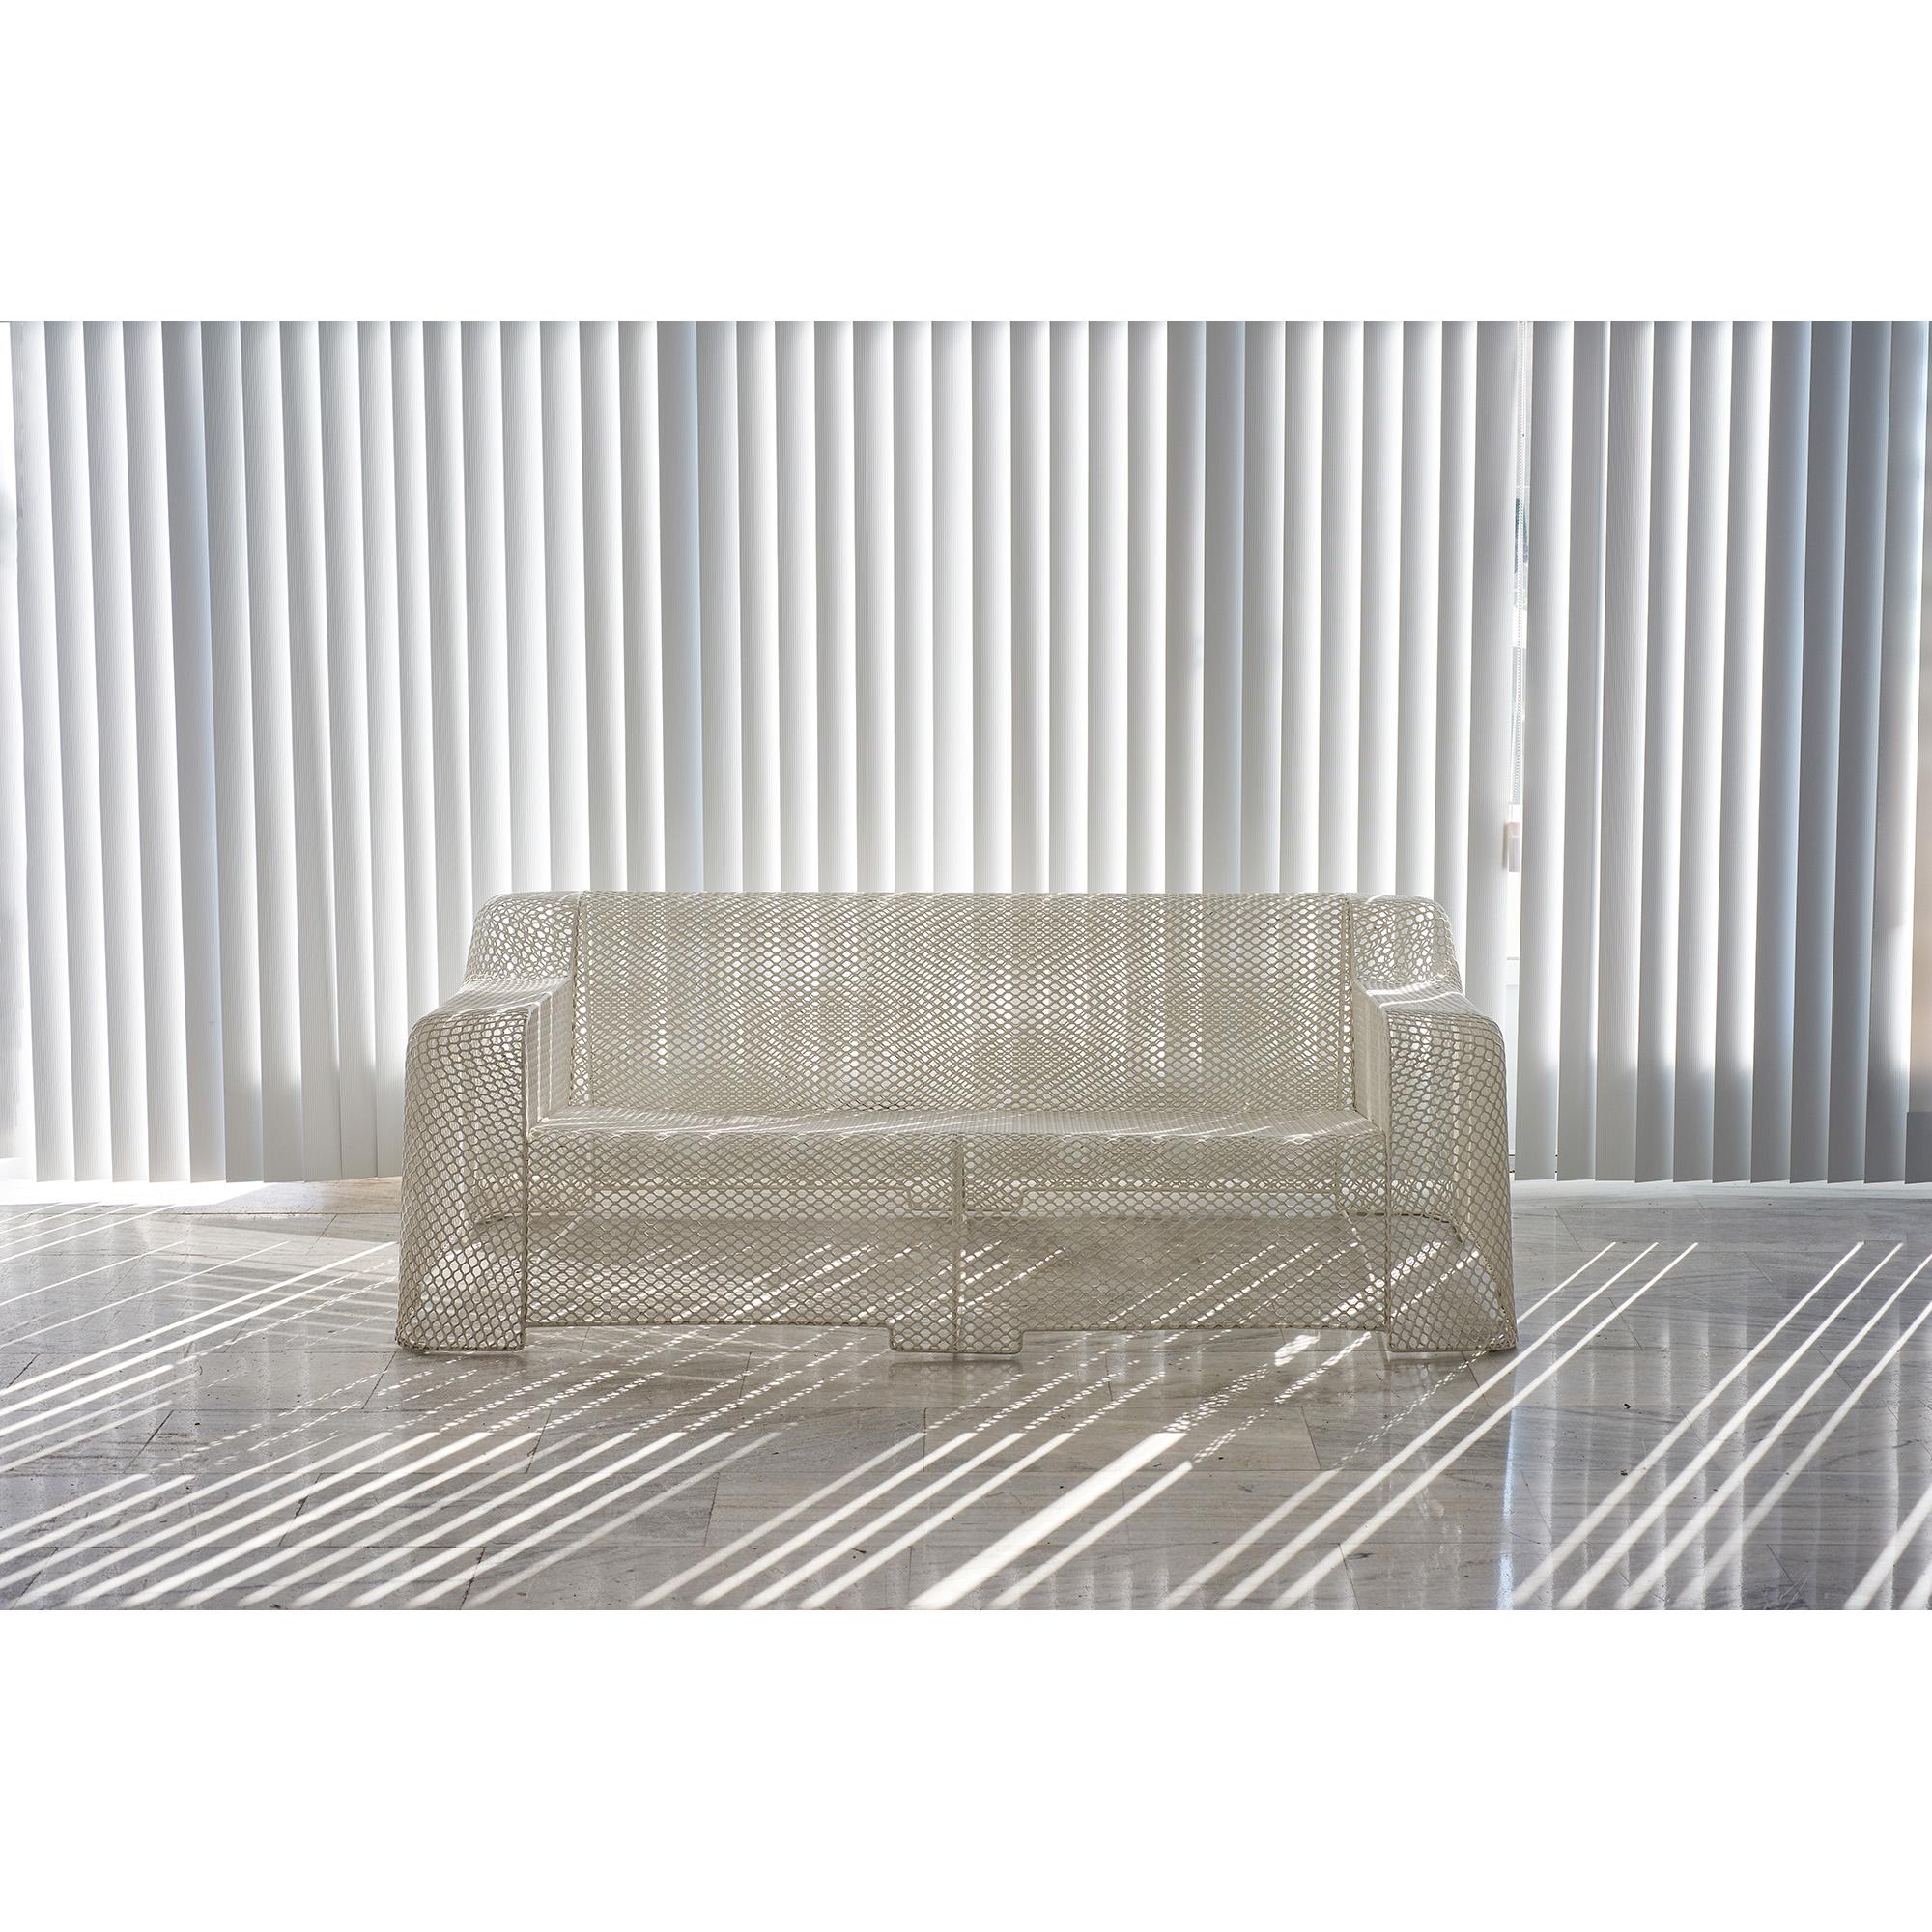 Transparent and light outdoor 'Ivy'  sofa by Paola Navone for Emu, Italy